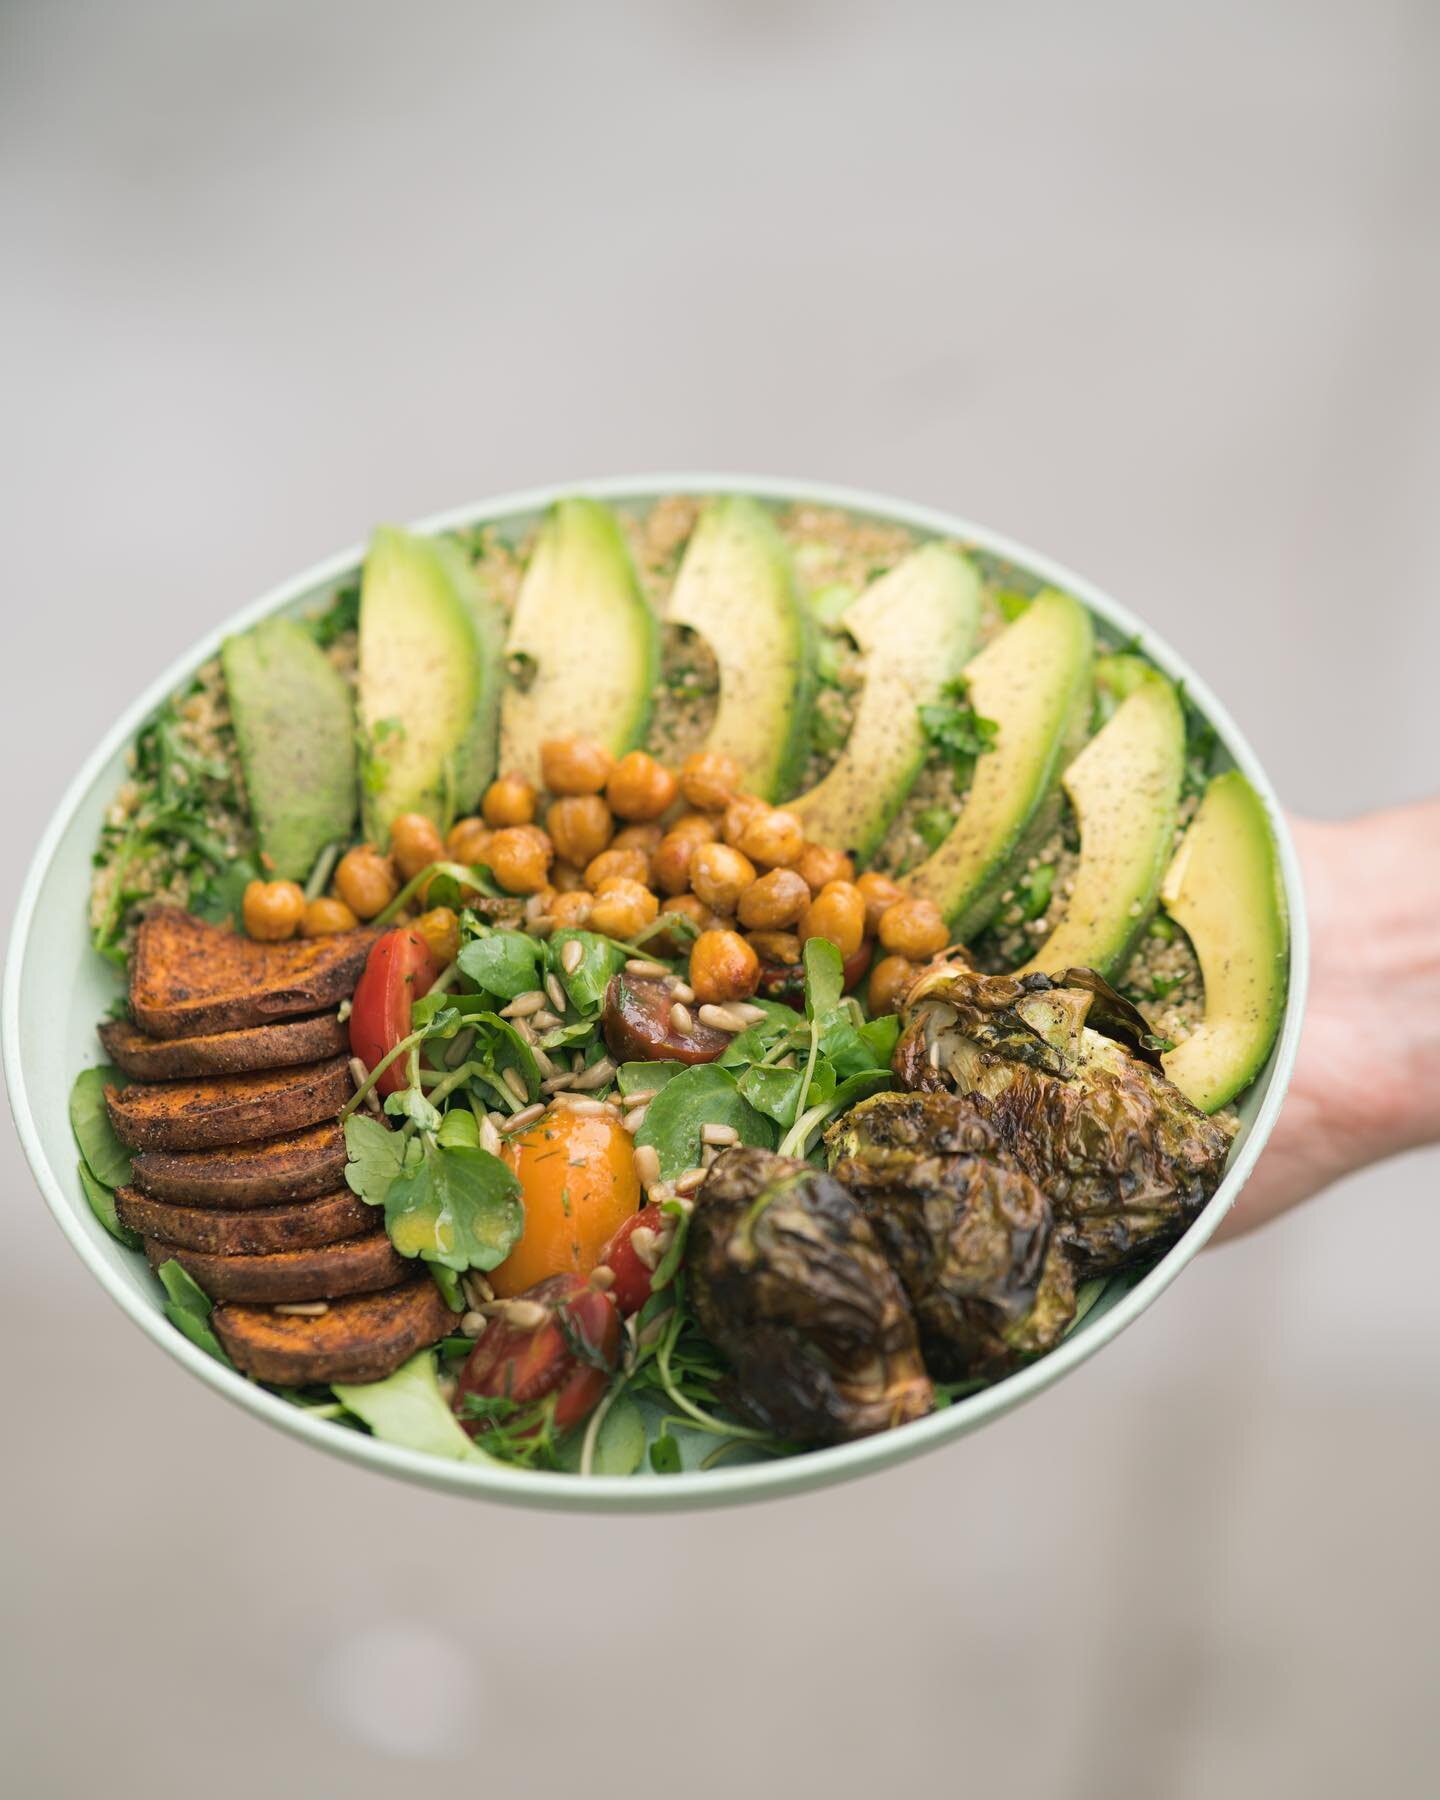 Today is the perfect day to try our limited time Buddha Bowl! Made completely in house with a quinoa pilaf, watercress salad with cherry tomatoes &amp; avocados, sweet potato fritters, roasted brussel sprouts, roasted chickpeas with sunflower seeds, 